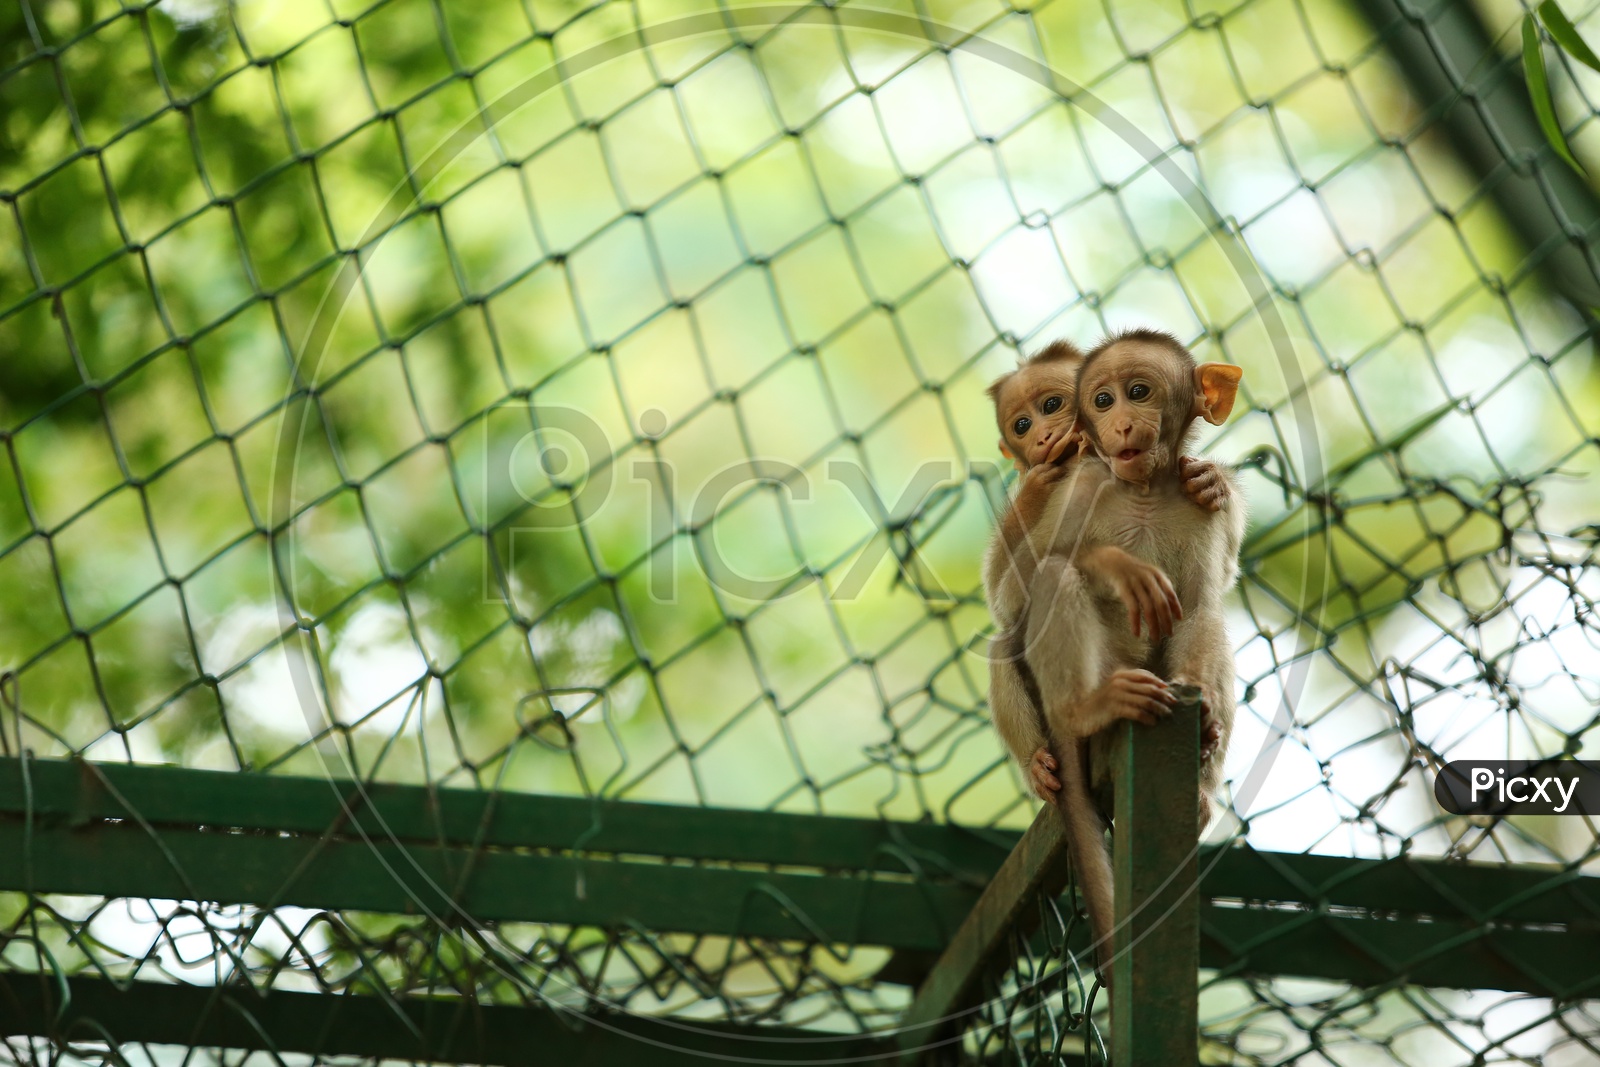 Young Indian Monkey Or Macaque In a Zoo Cage Backdrop